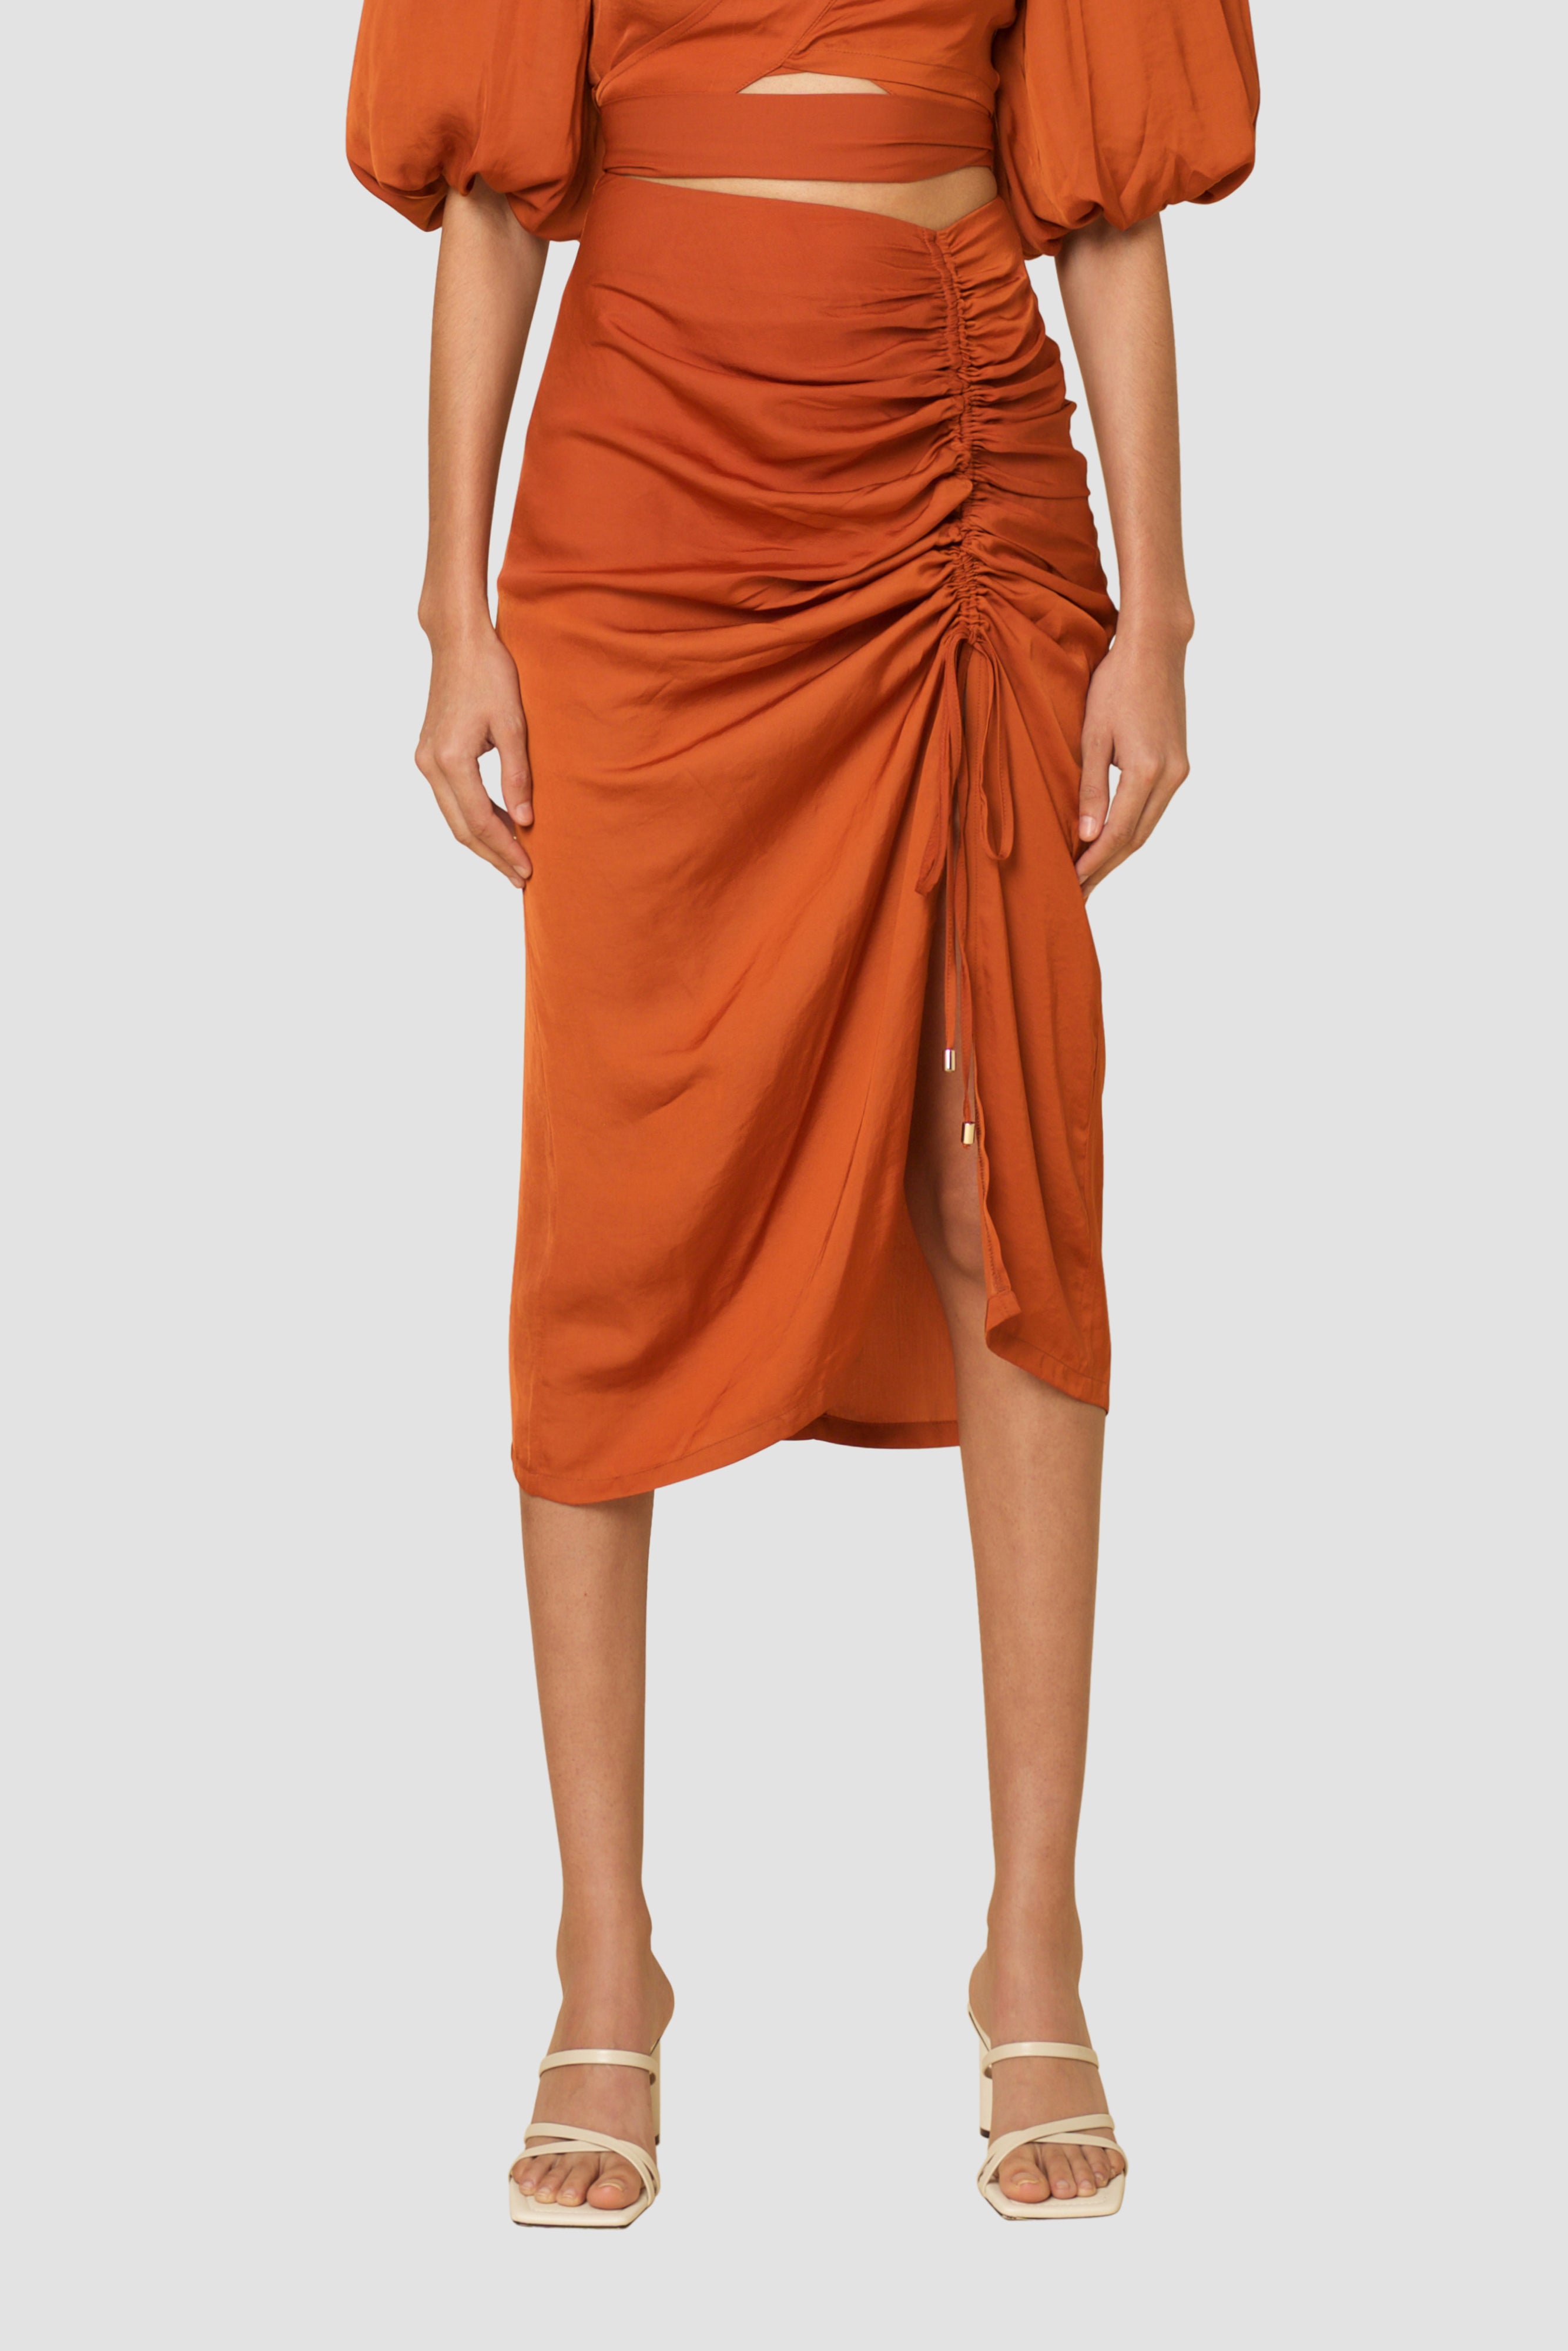 Laurie Tan Satin Pull-Cord Skirt